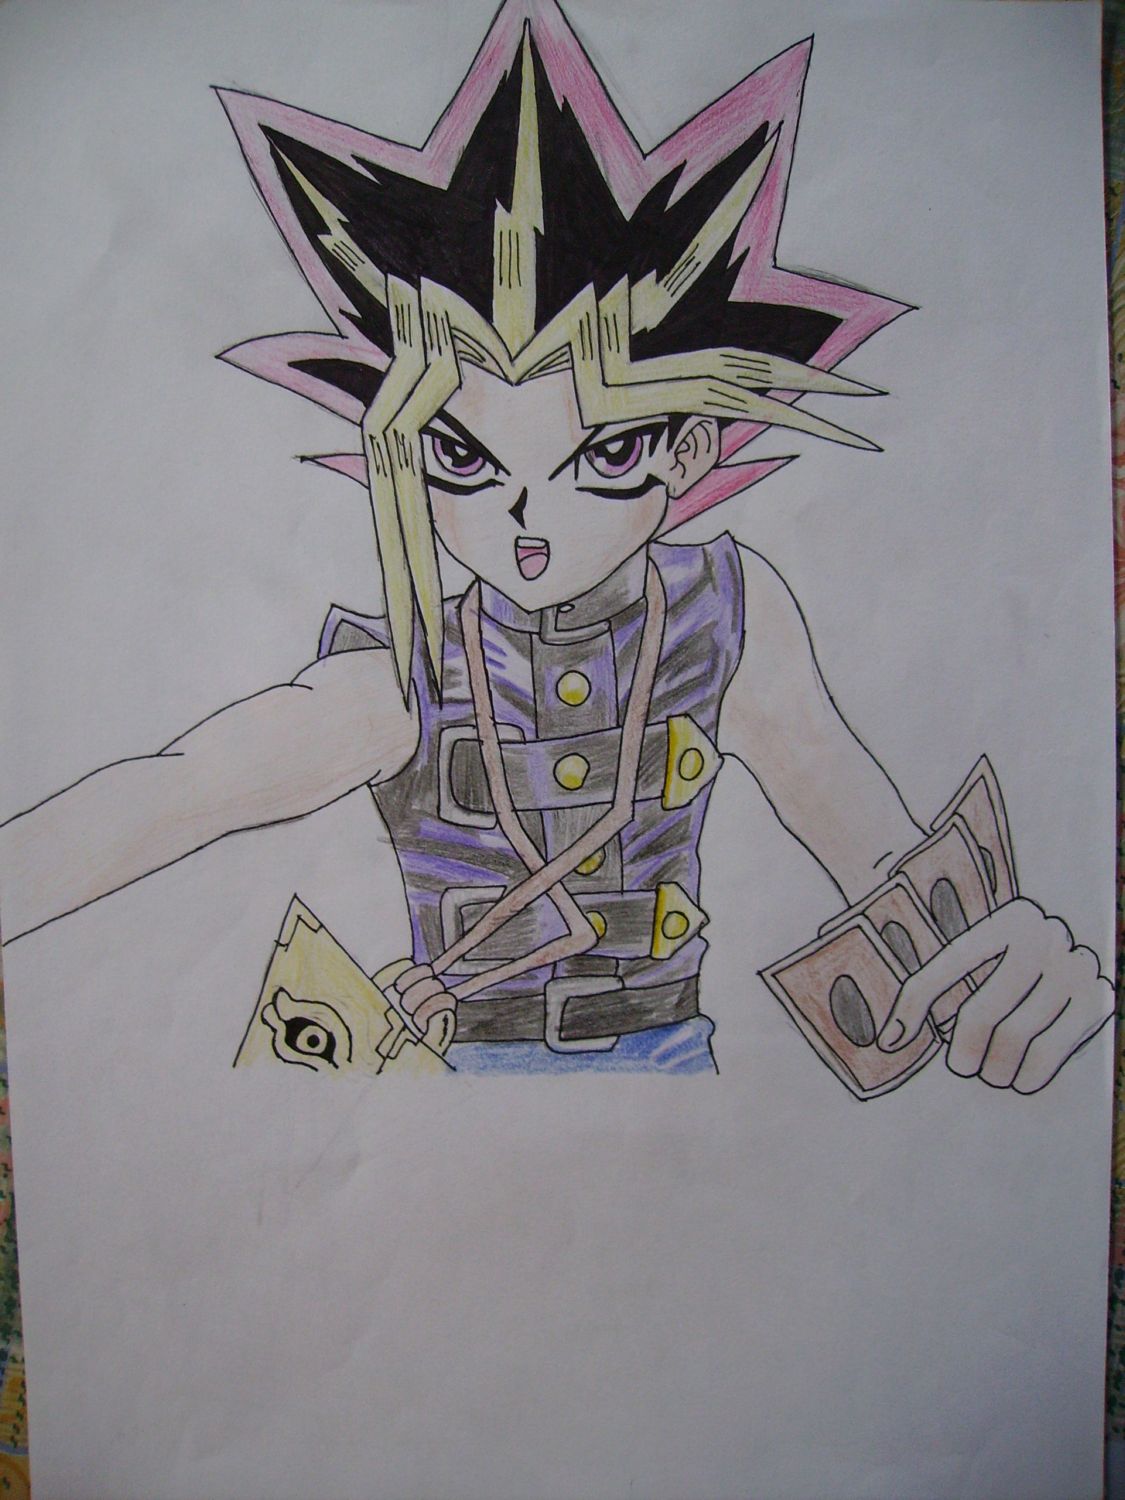 Yami! by Iskeanime16